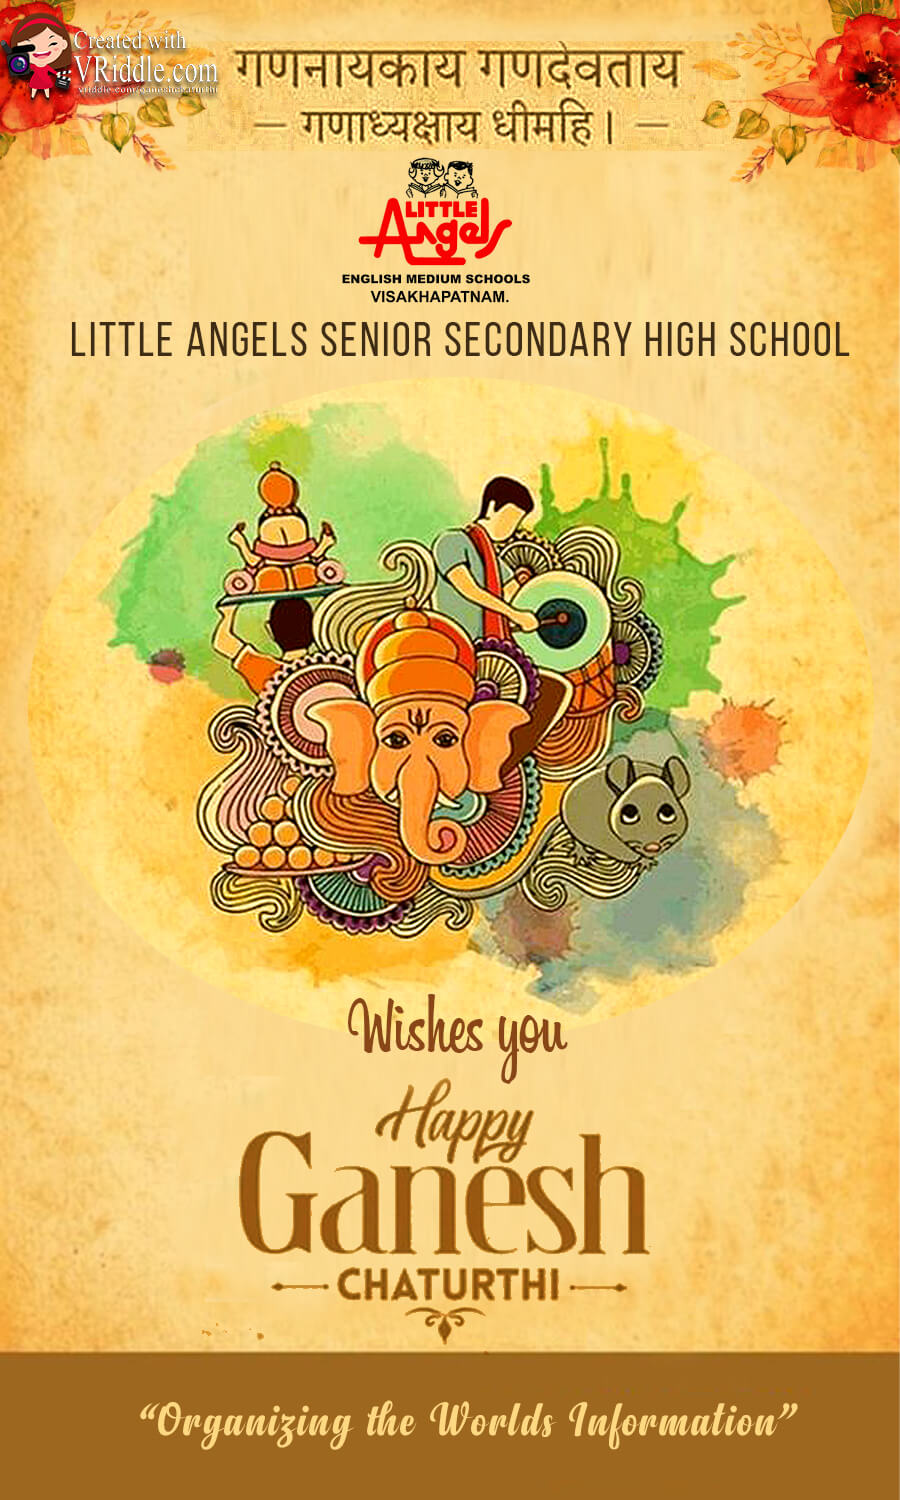 Happy Ganesh Chaturdhi Wishes, Greetings, Personalize with Your ...